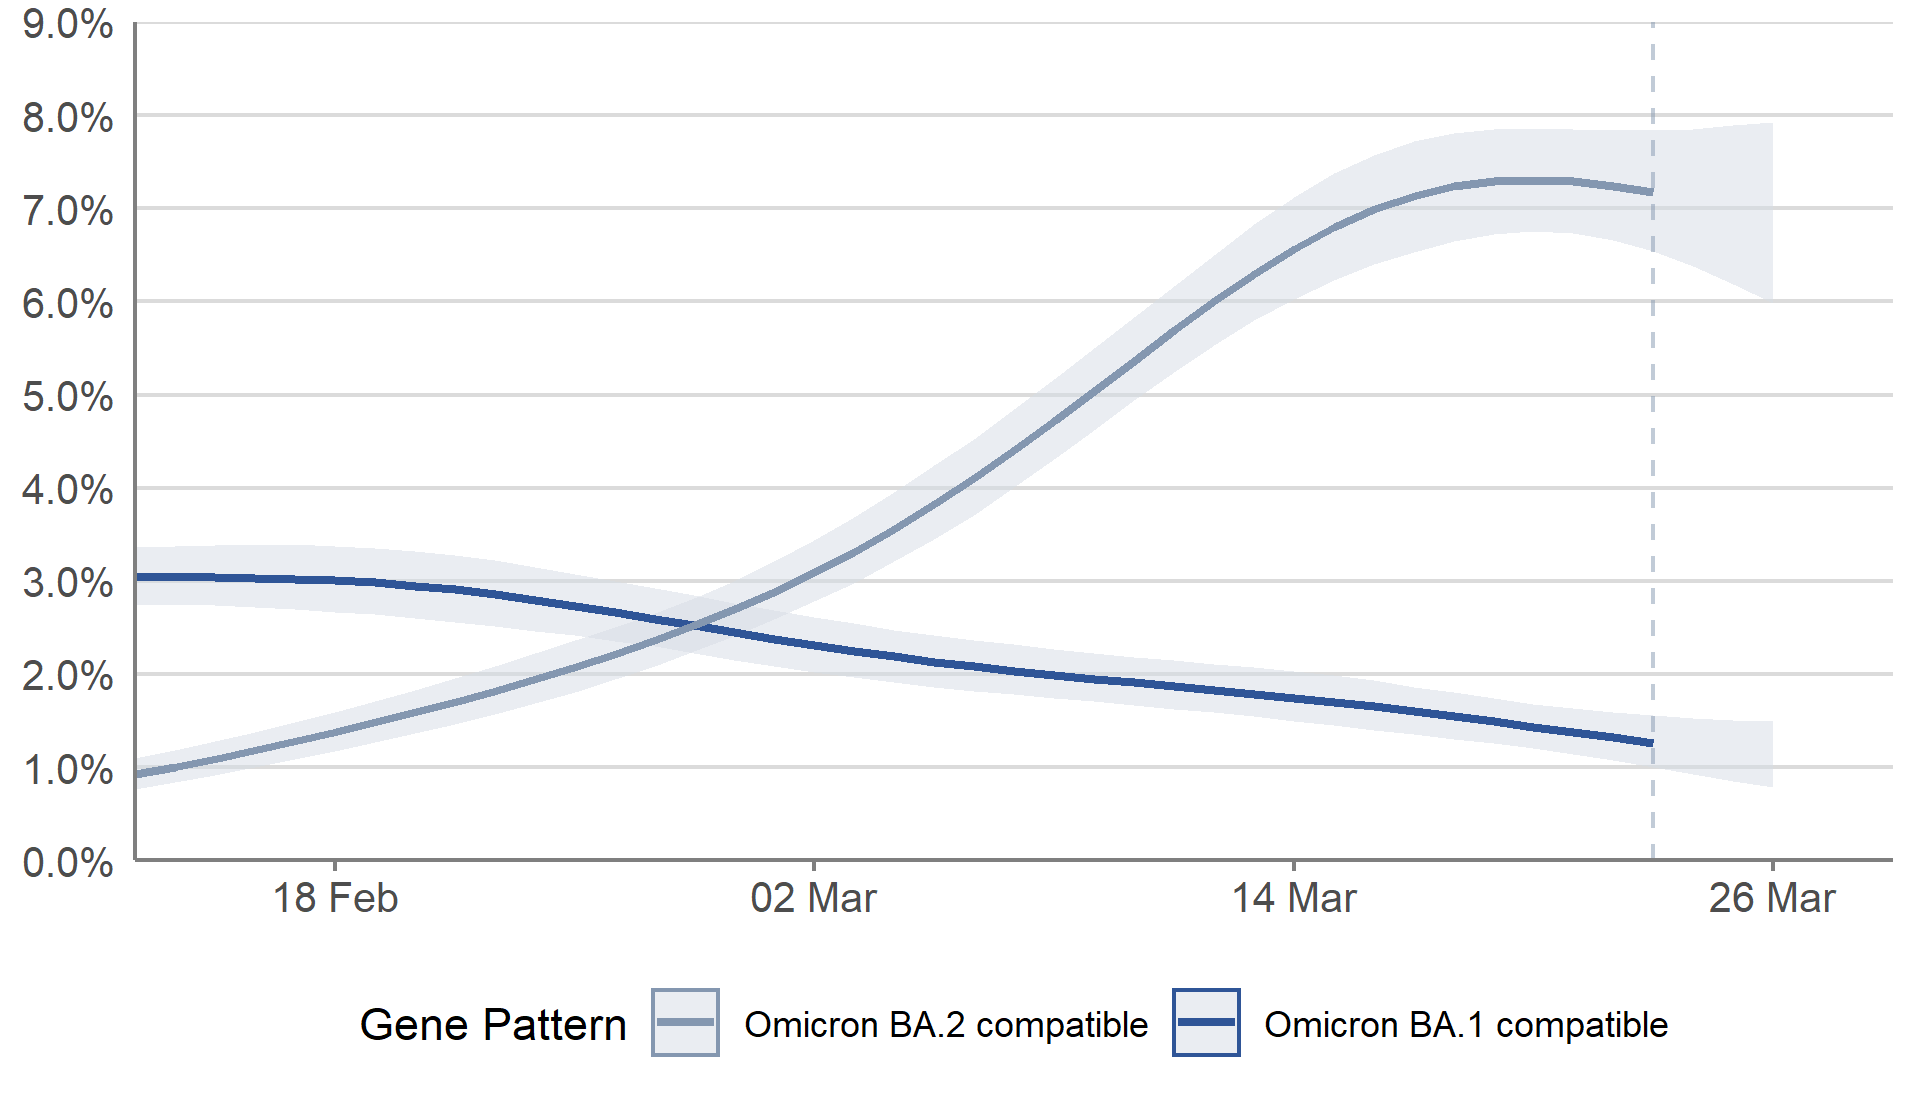 In Scotland, the percentage of people with infections compatible with the Omicron BA.2 variant is uncertain in the most recent week. The percentage of people with infections compatible with the Omicron BA.1 decreased in the most recent week.